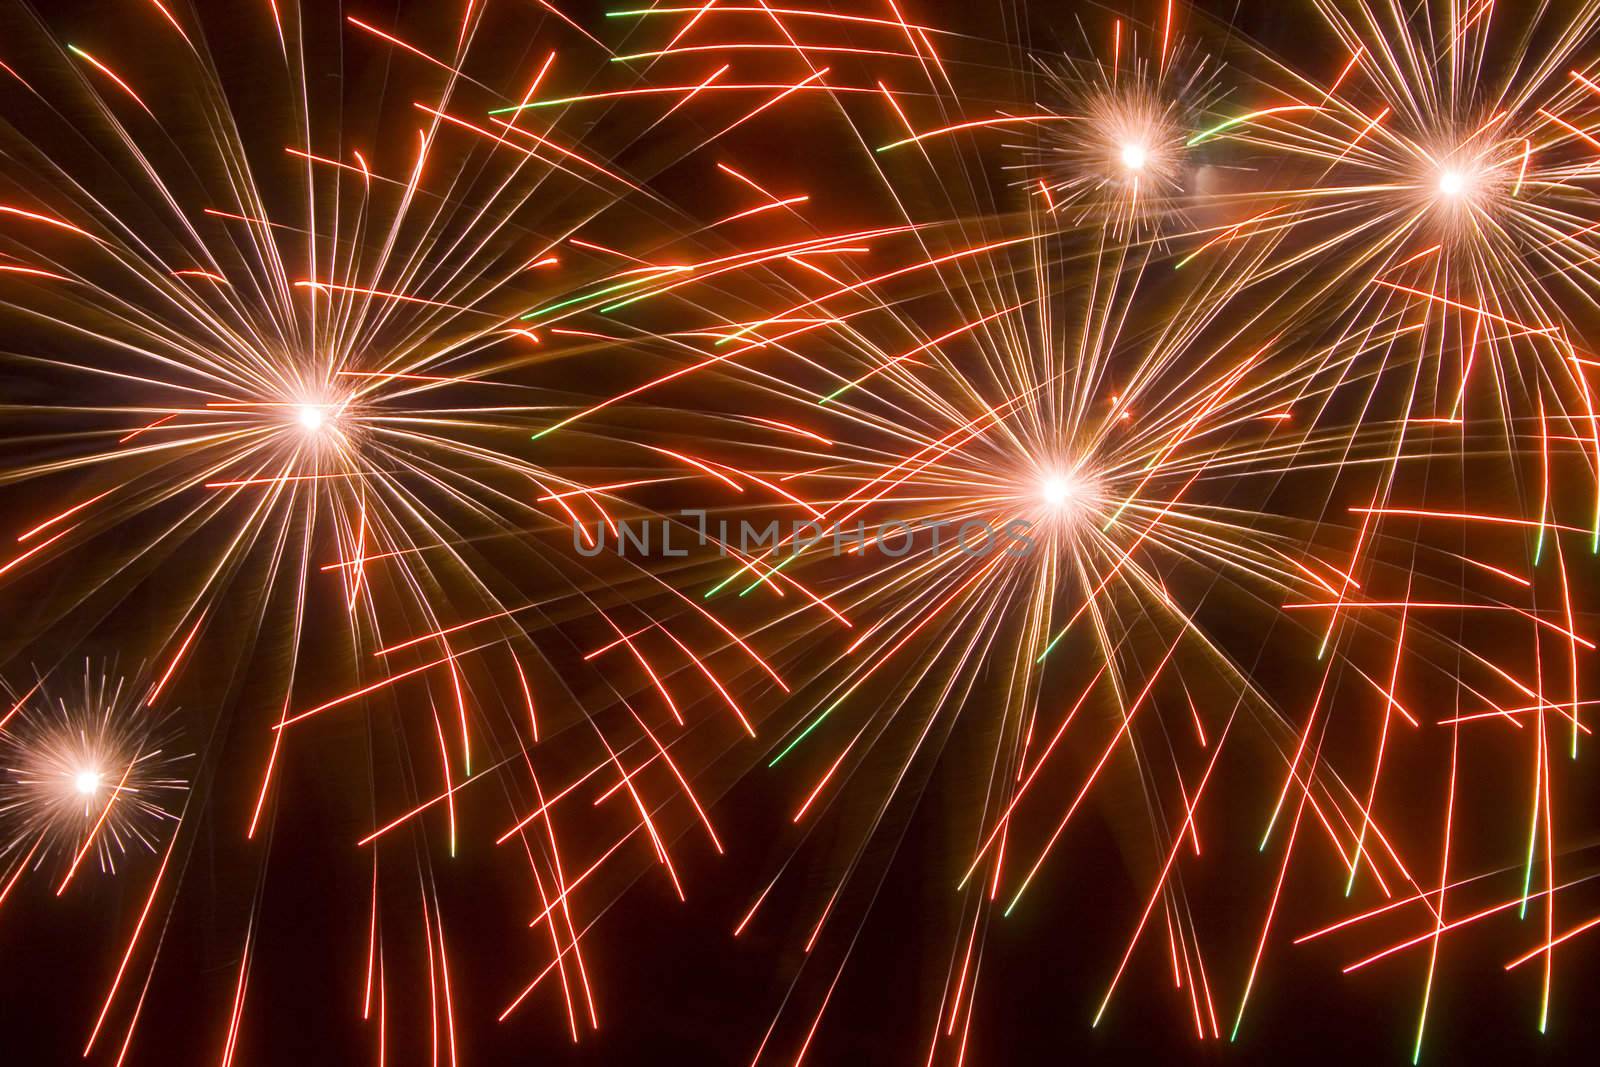 Some holiday fireworks on the night sky